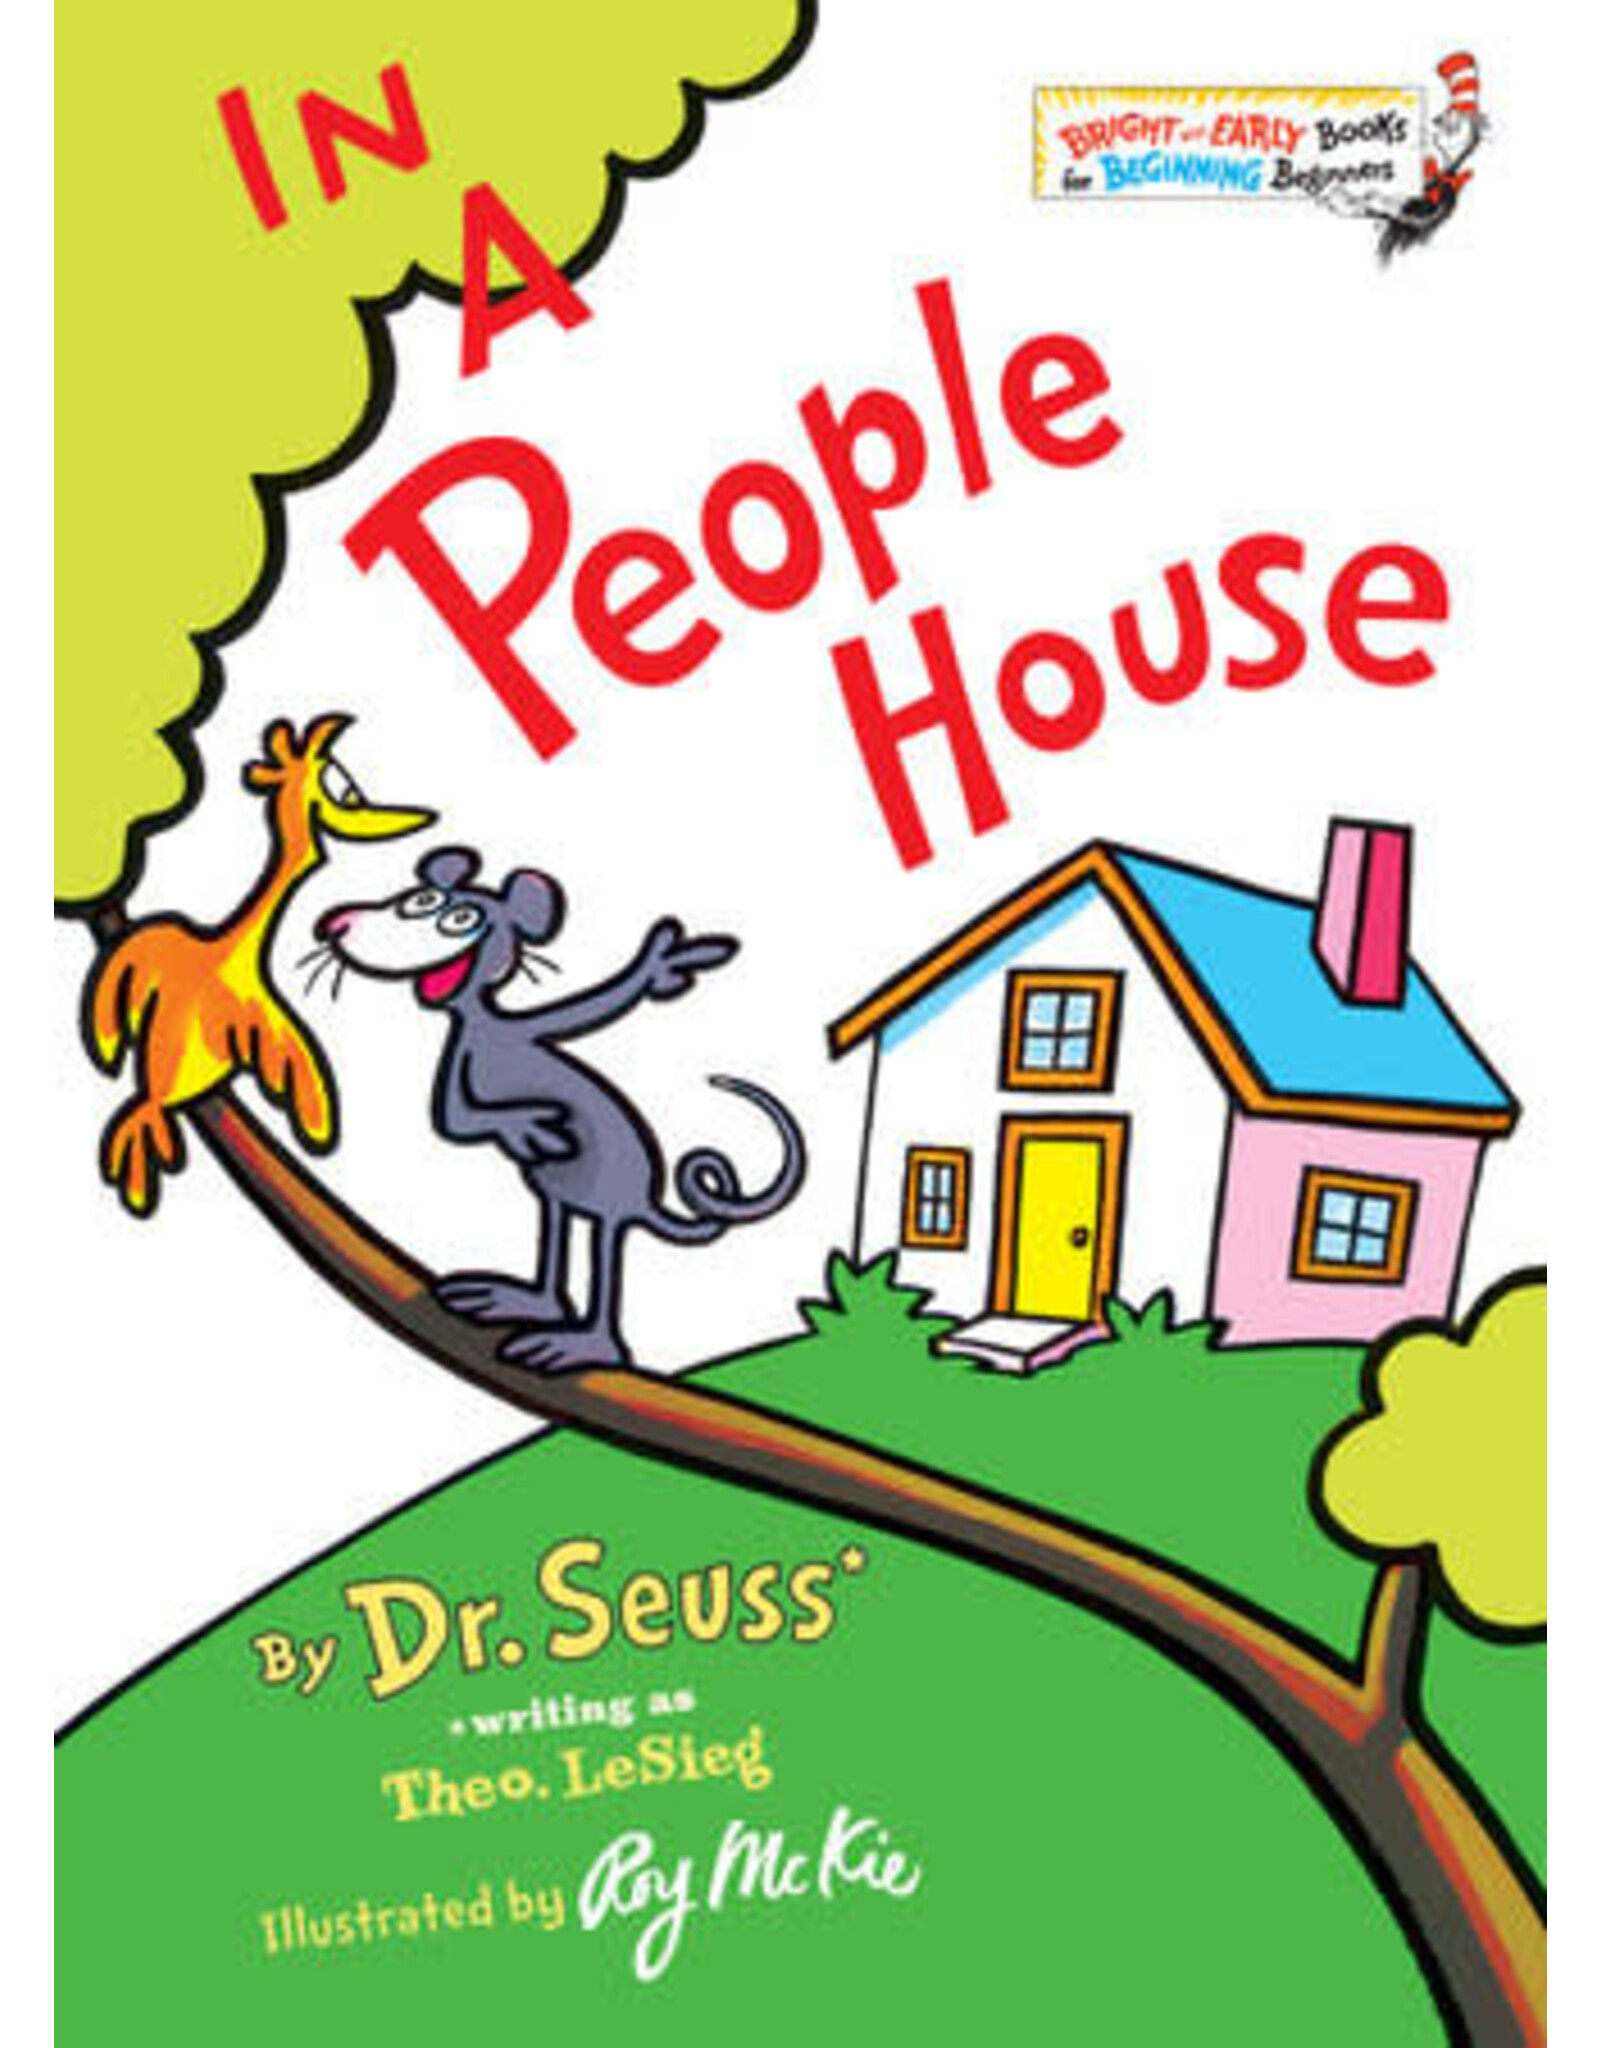 Dr. Seuss In a People House by Dr. Seuss